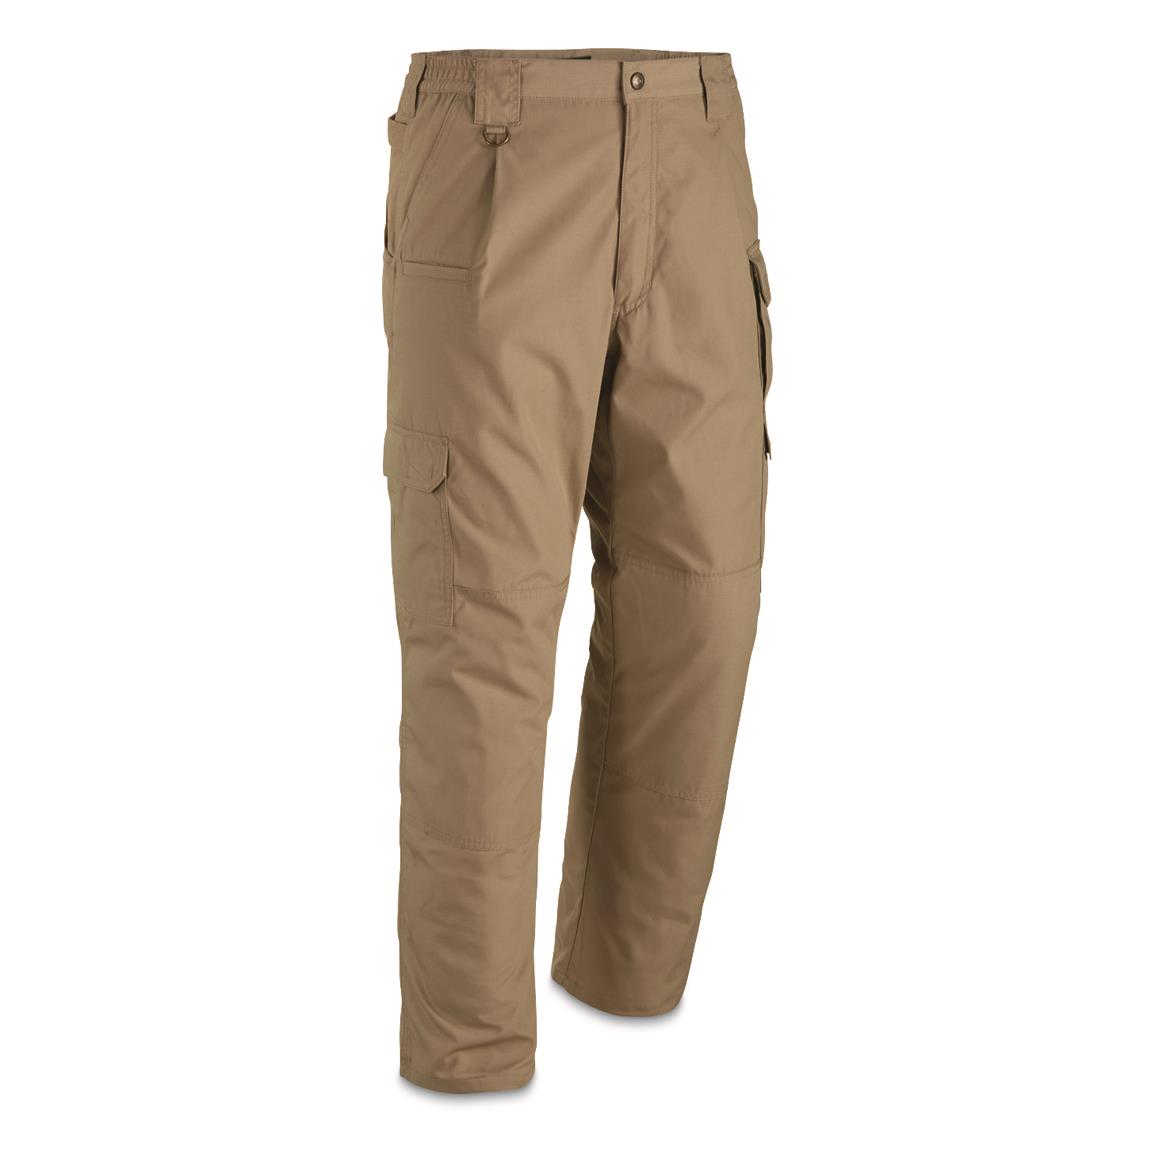 100% Cotton Rip - Stop Pants - 85160, Tactical Clothing at Sportsman's ...